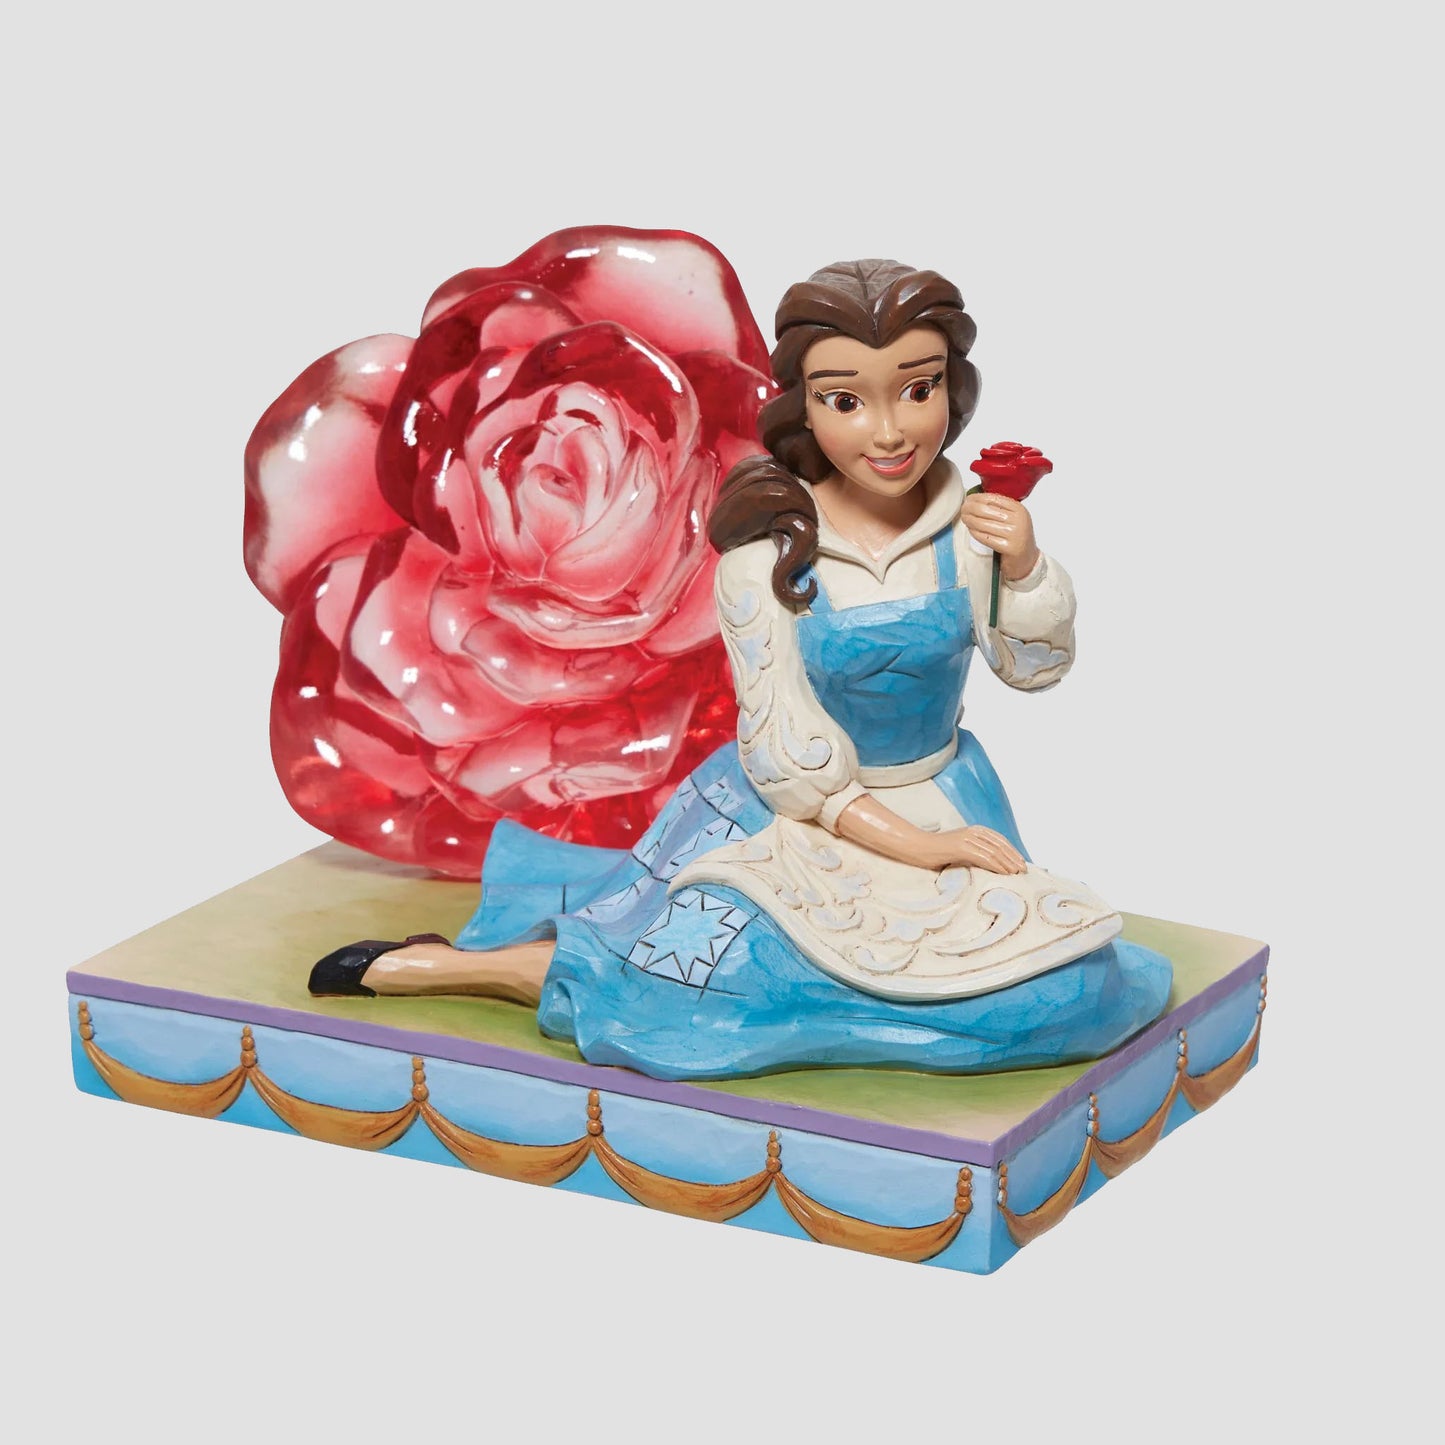 Belle "An Enchanted Rose" Beauty and the Beast Jim Shore Disney Traditions Statue